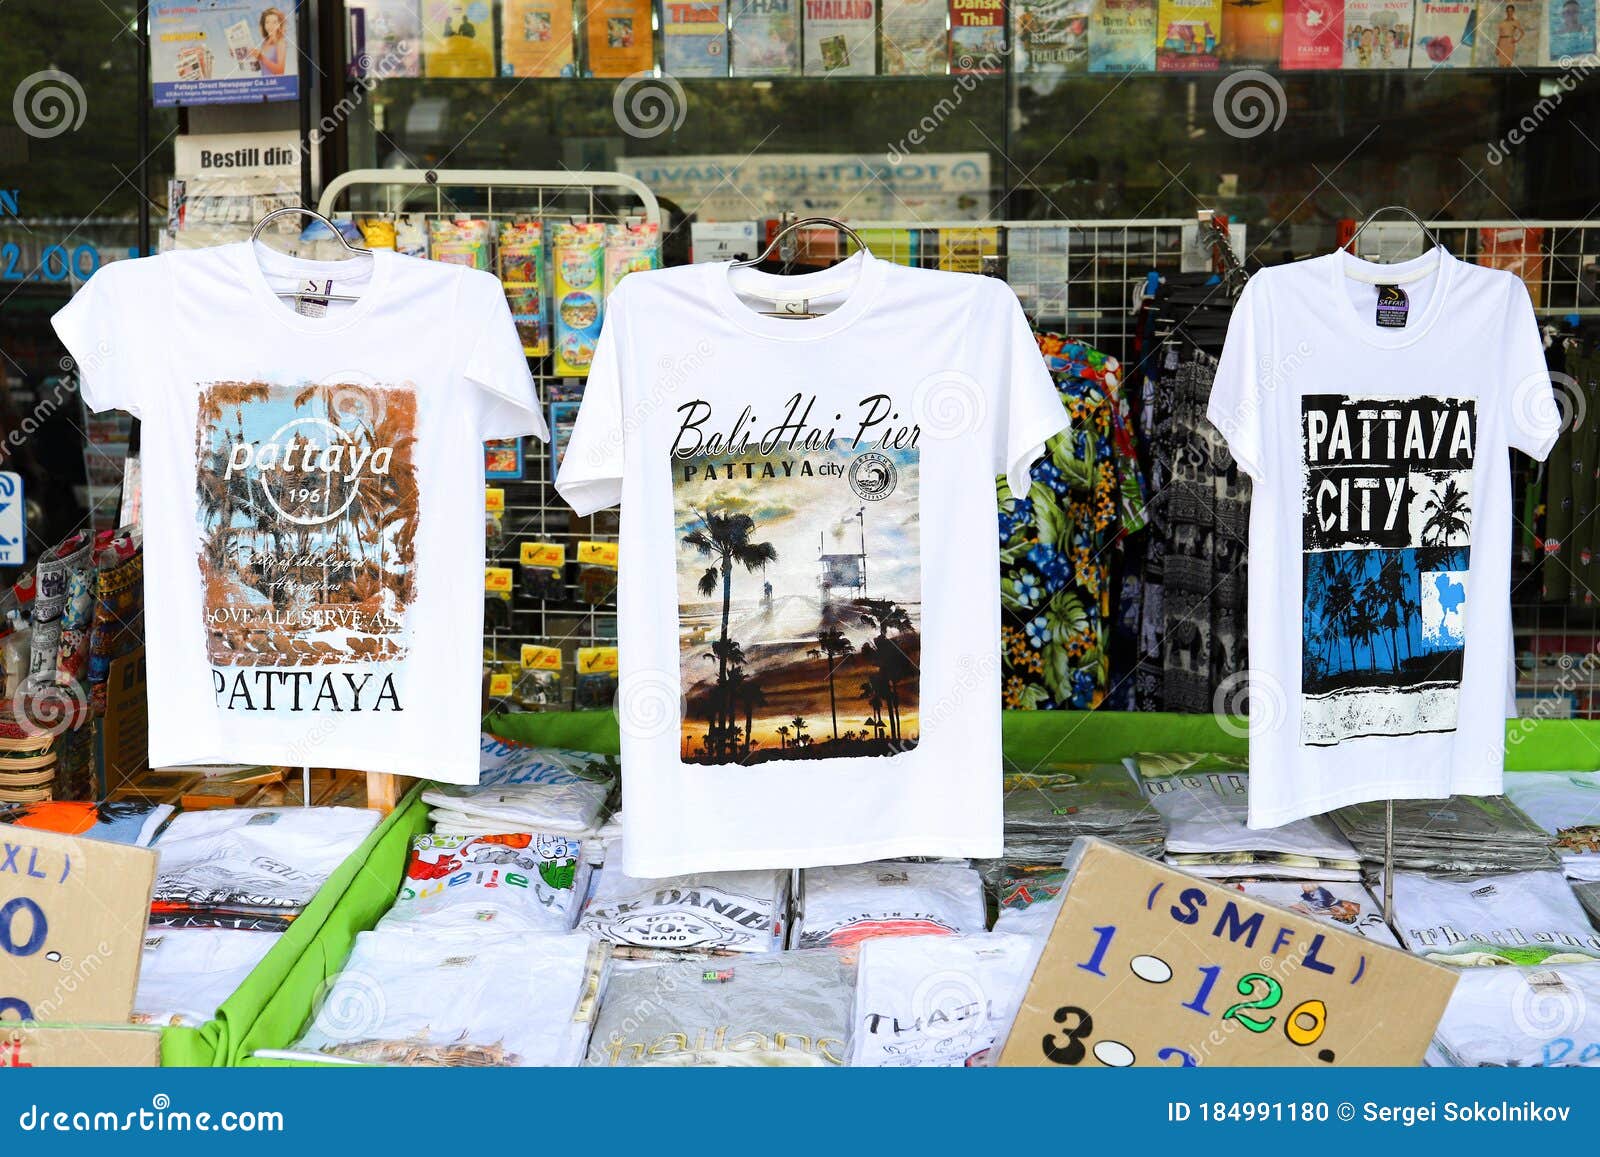 Pattaya Print T-shirt To the Markets. Editorial Image - Image of color ...